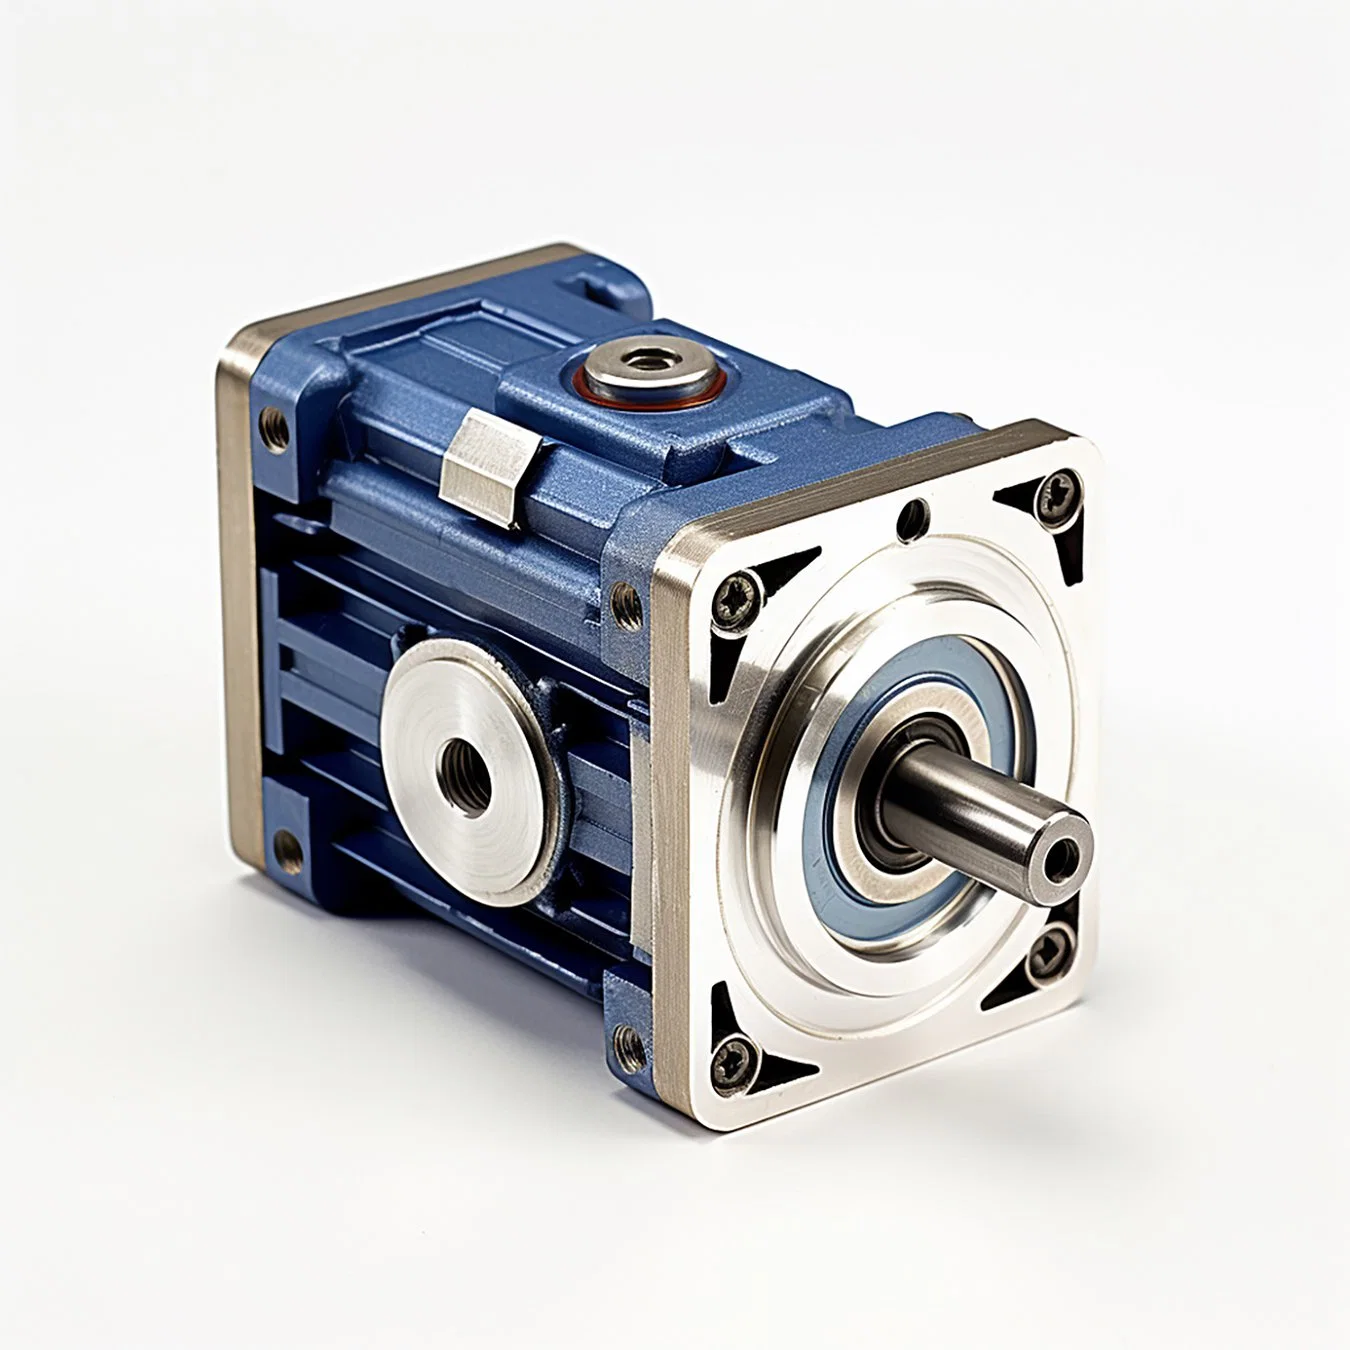 Ultra Reliable Pinion Gear Motor for Aerospace Manufacturing